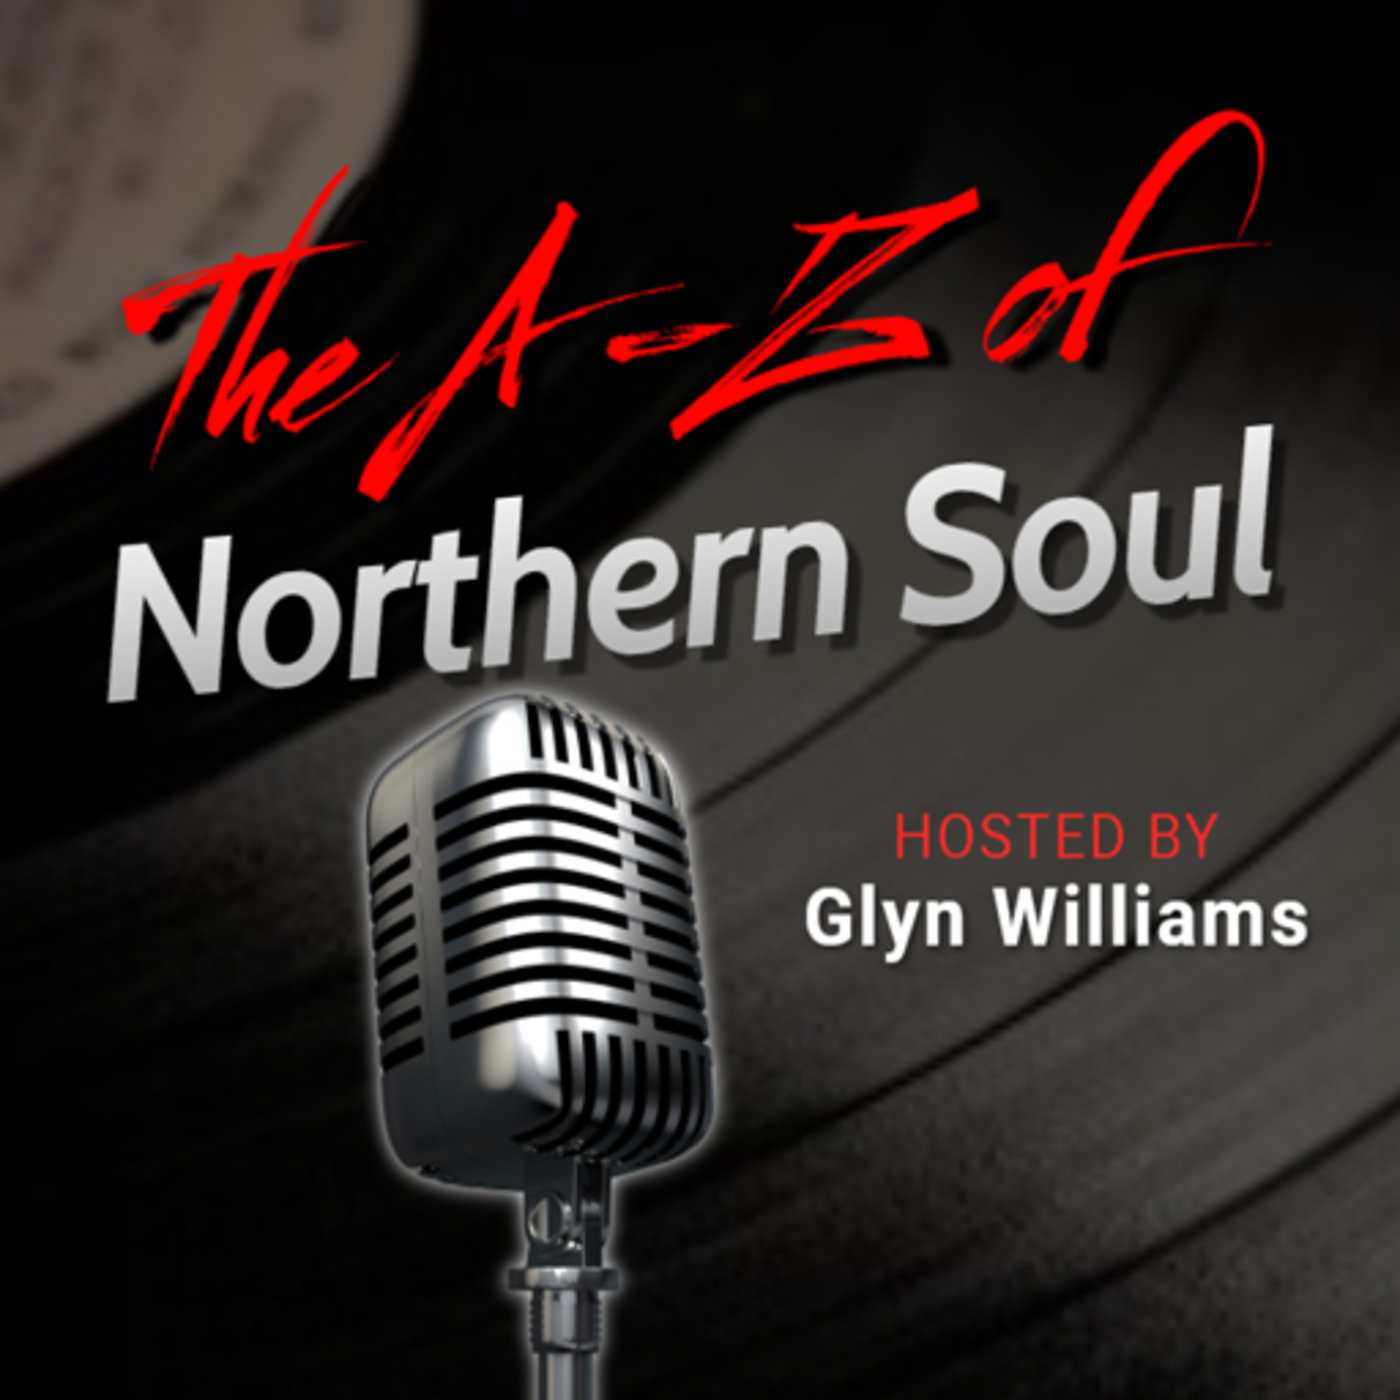 The A-Z of Northern Soul E079